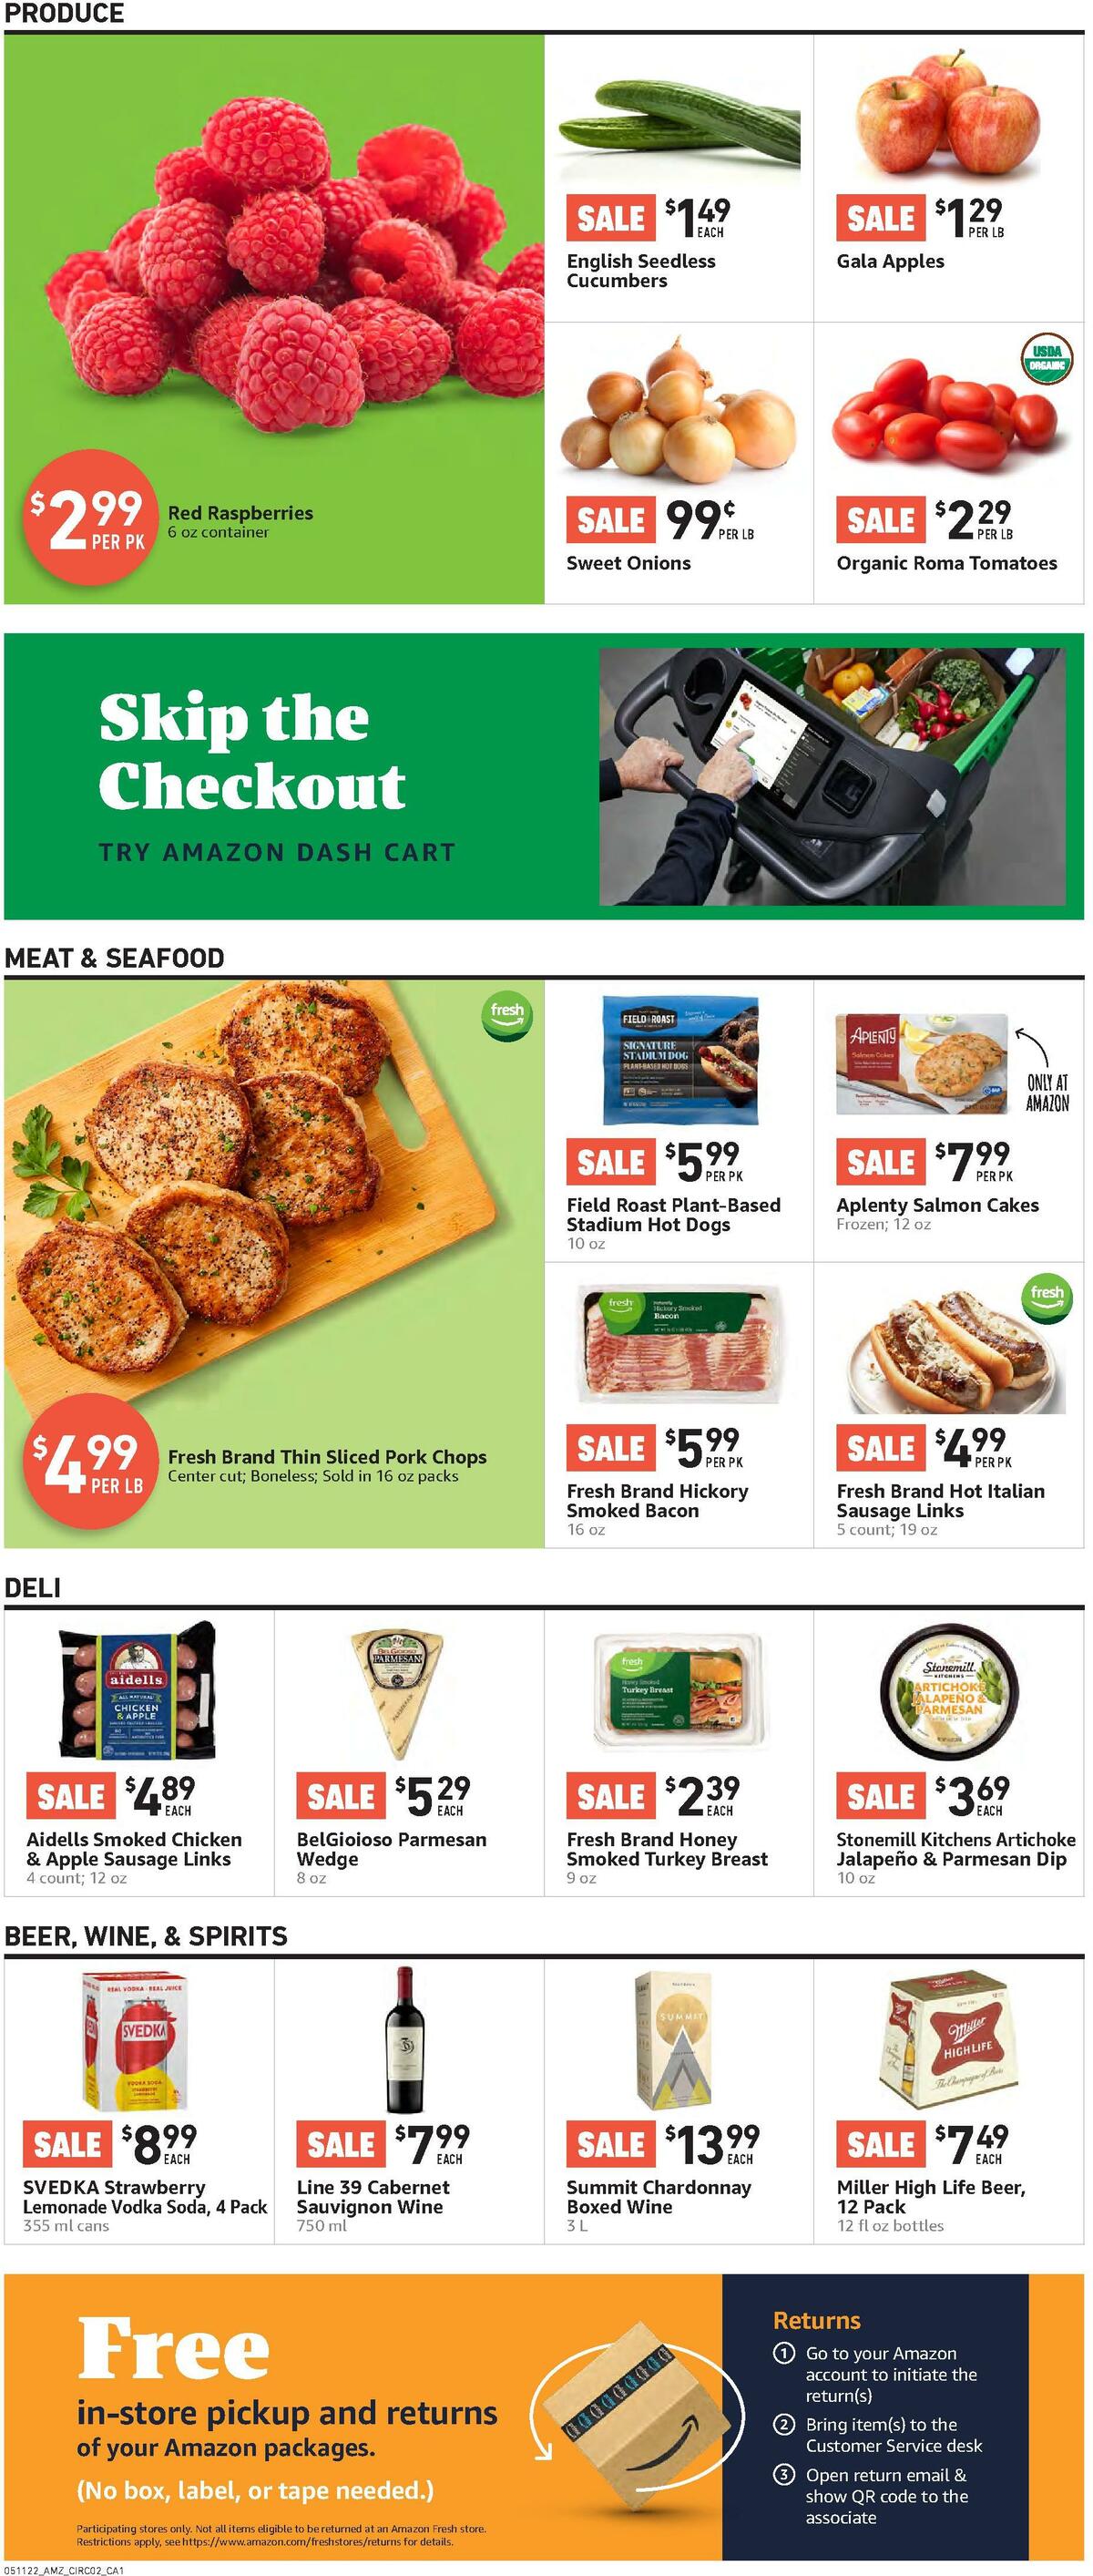 Amazon Fresh Weekly Ad from May 11